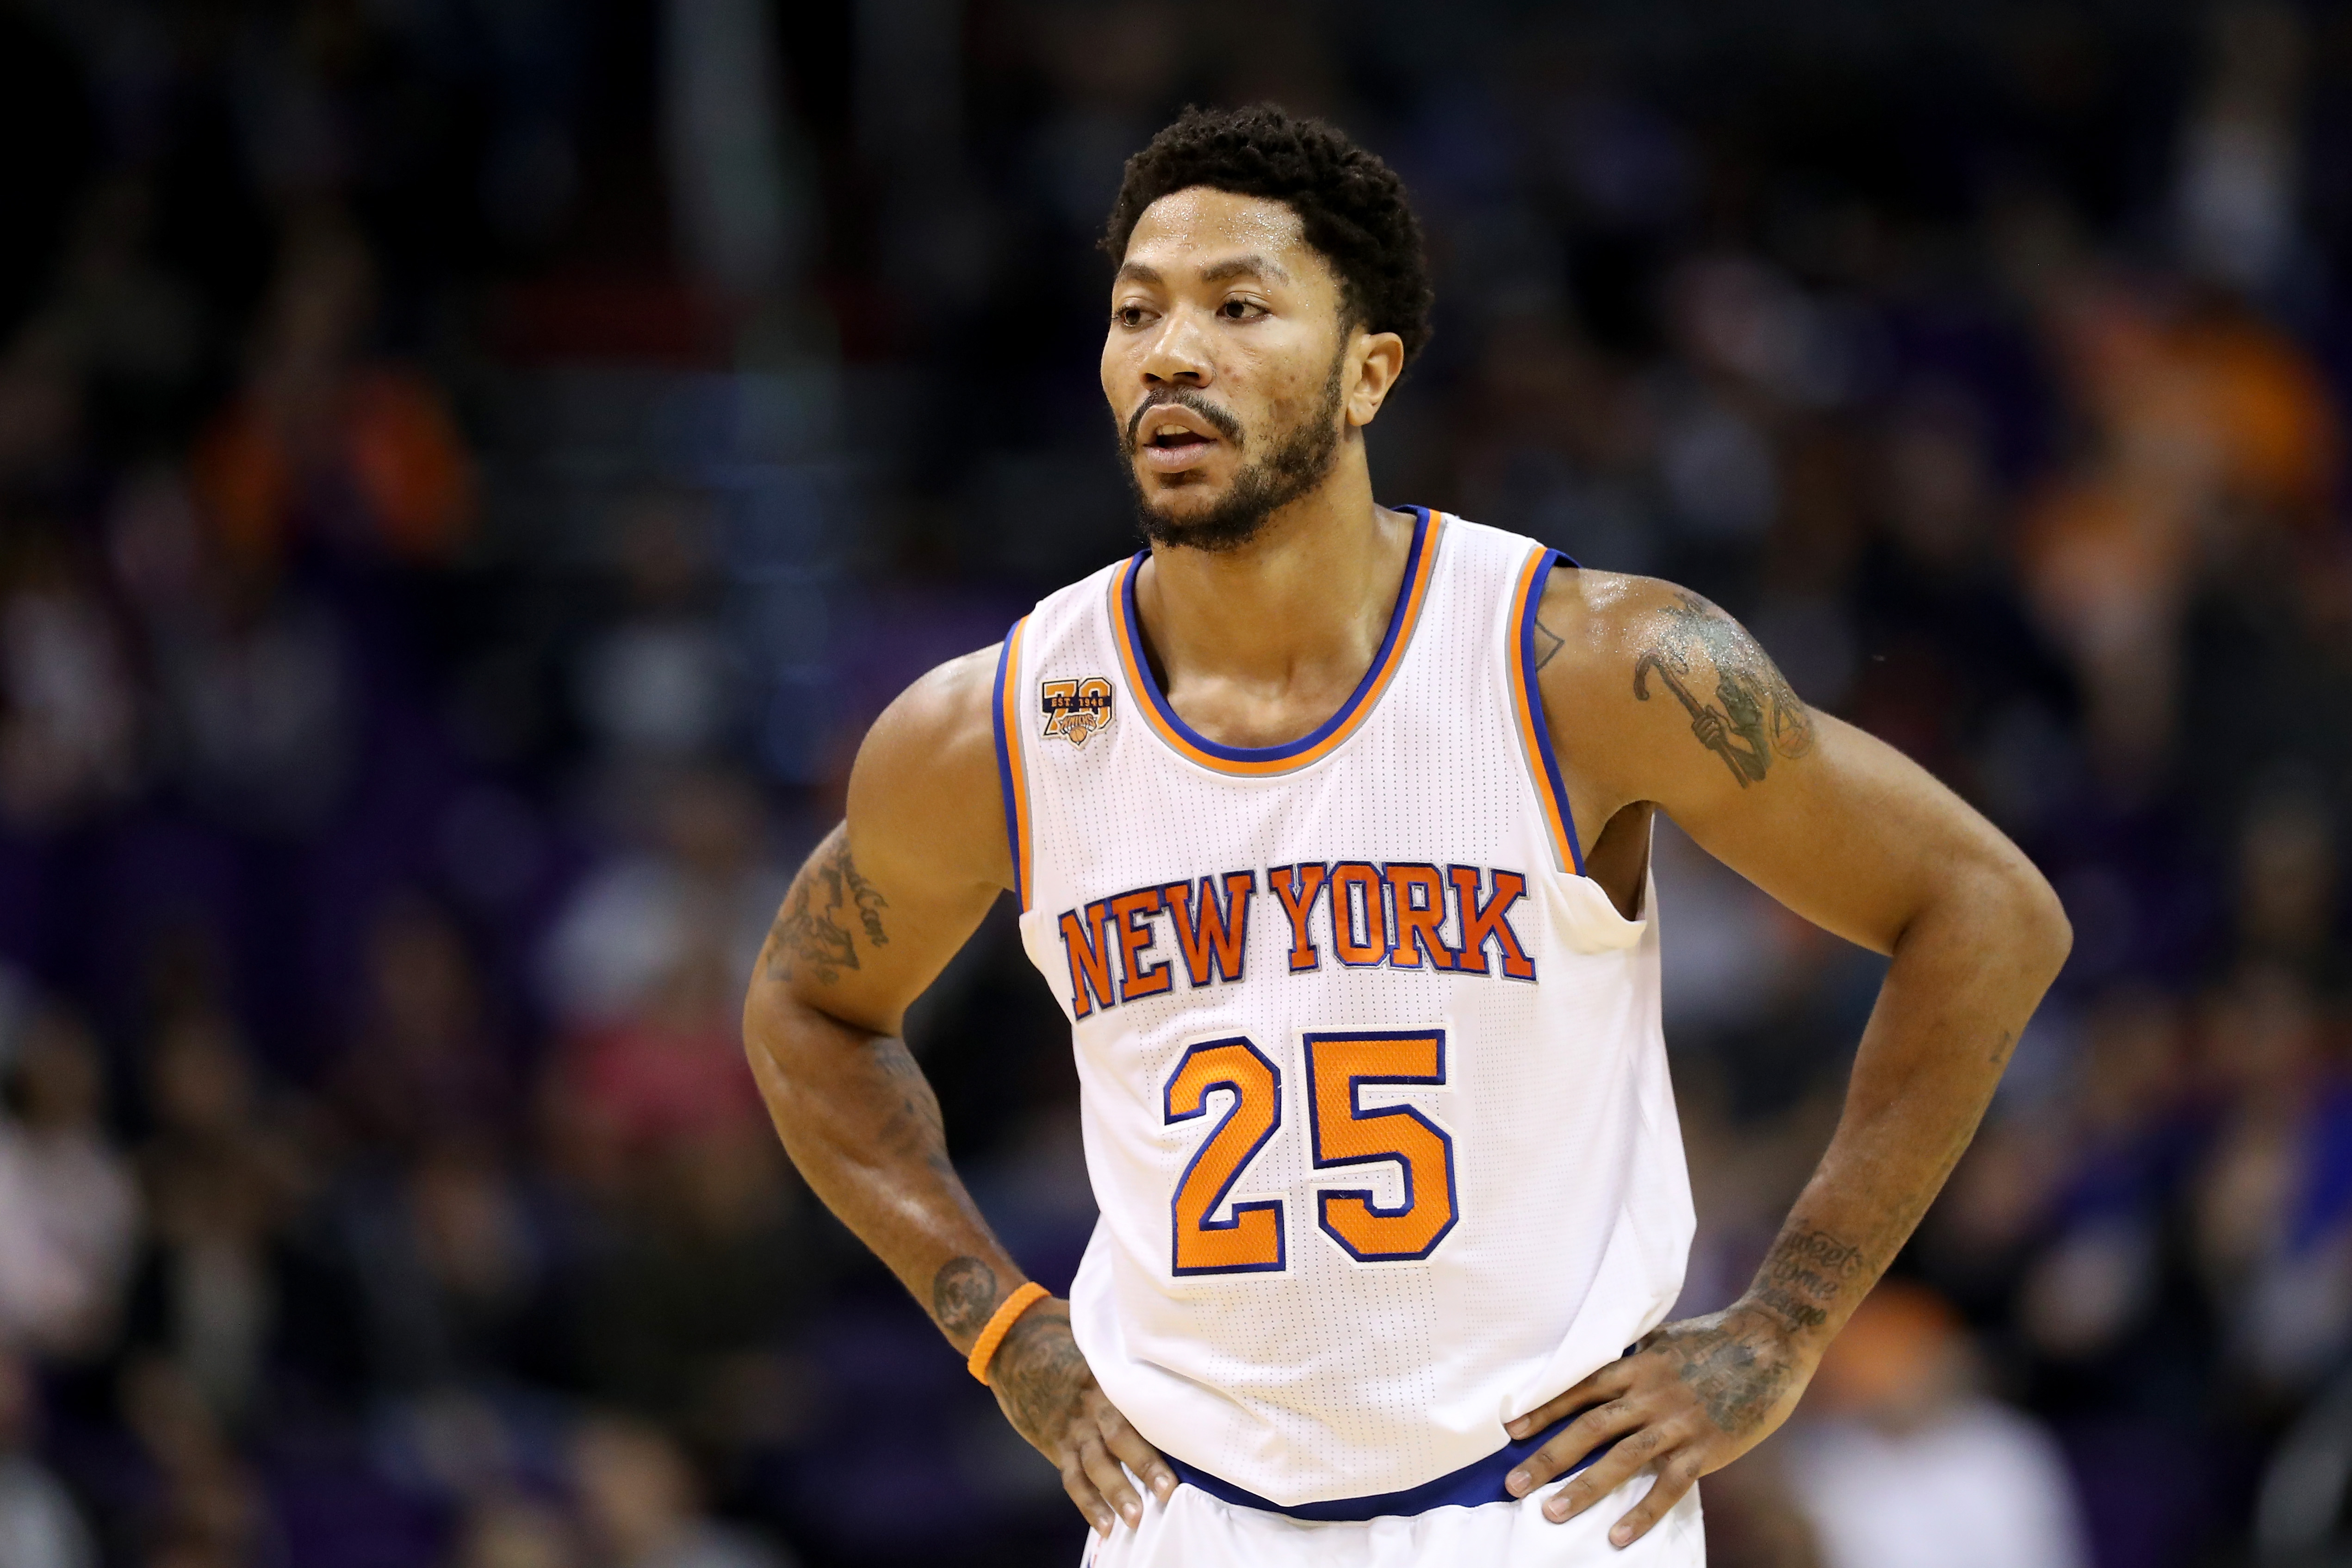 Knicks' Derrick Rose misses game for unknown reason